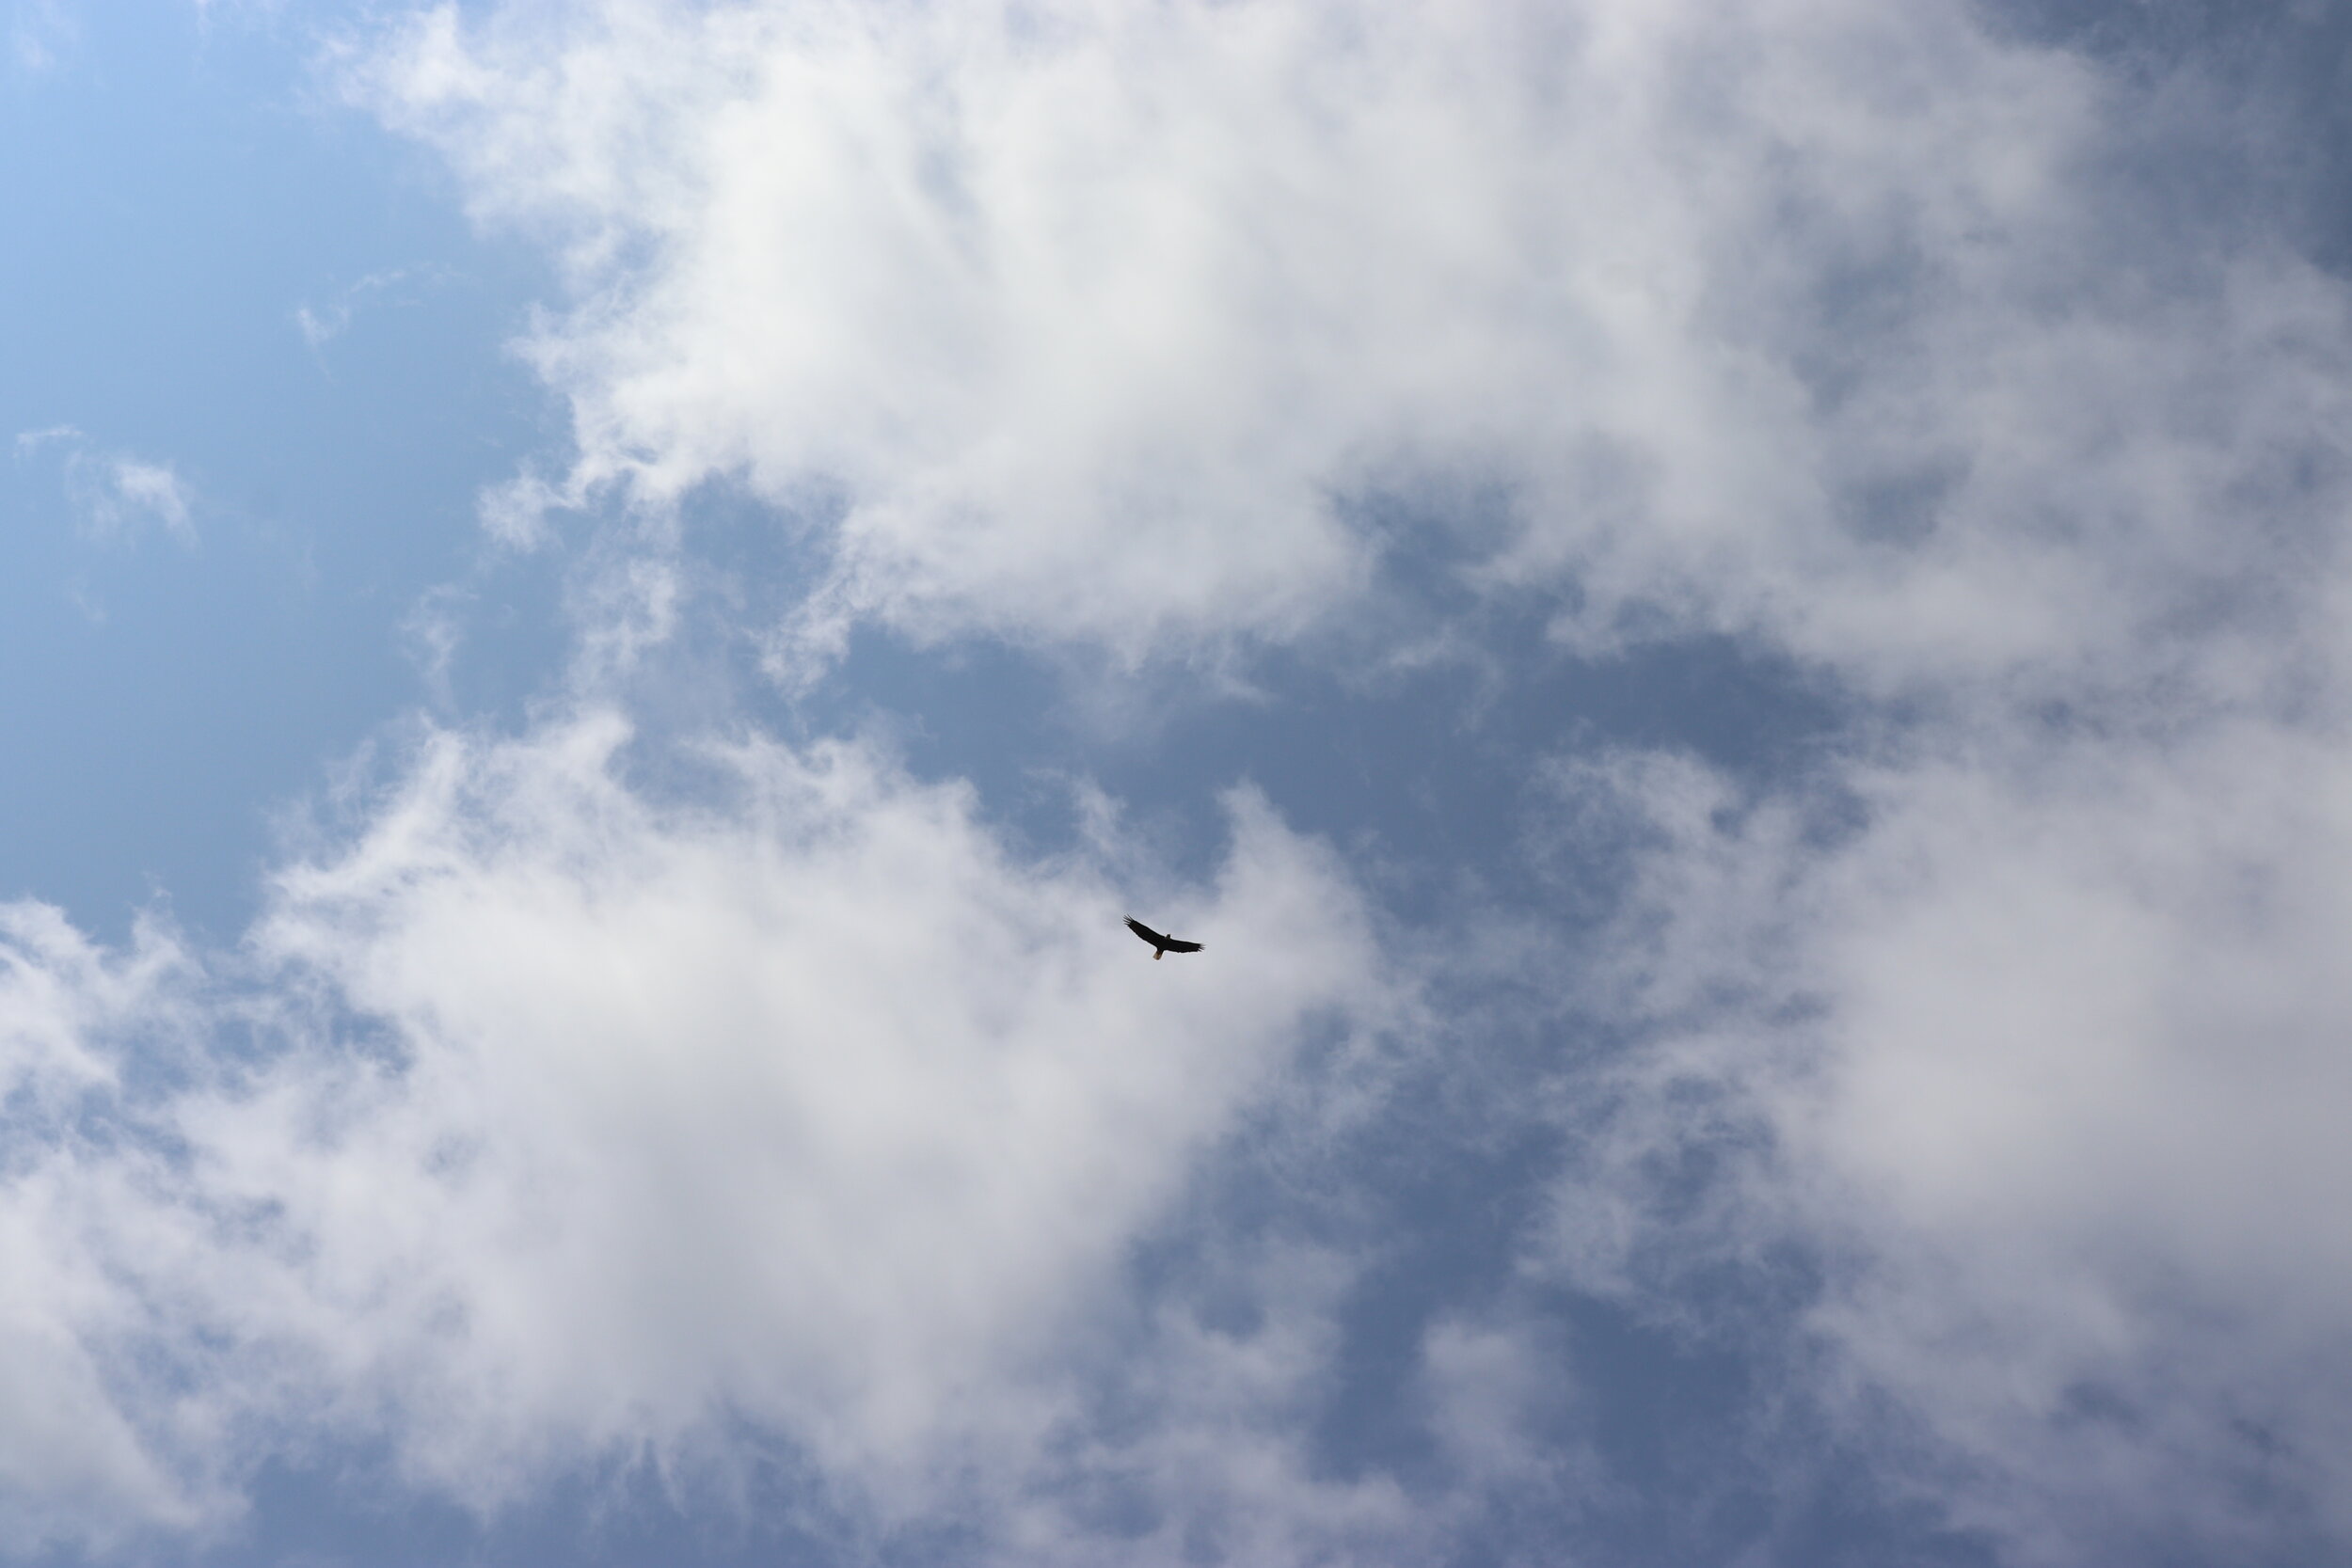  A bald eagle spotted flying overhead 